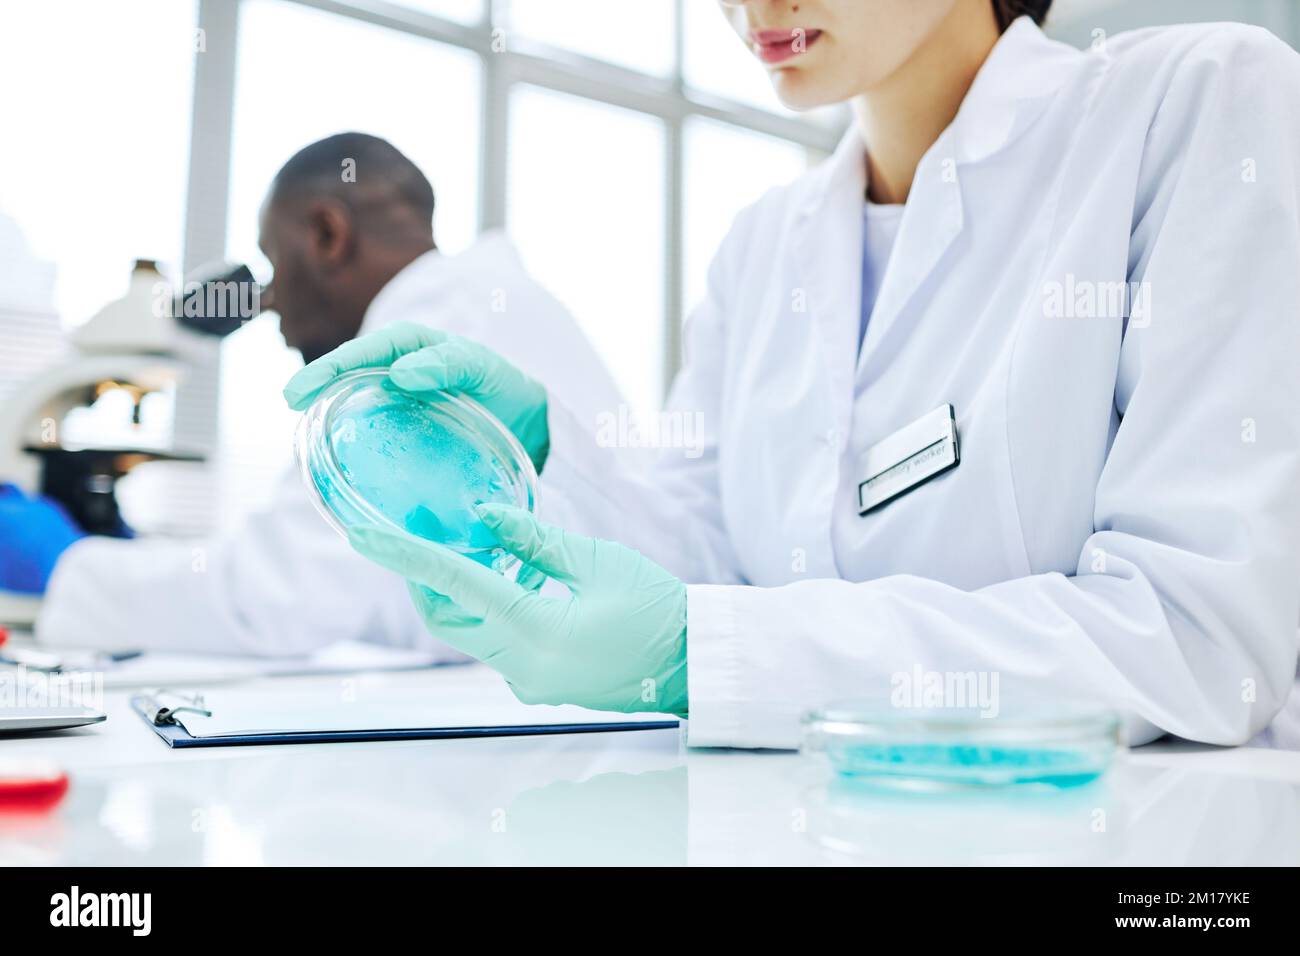 Close up of female scientist holding petri dish while working with medical samples in laboratory Stock Photo